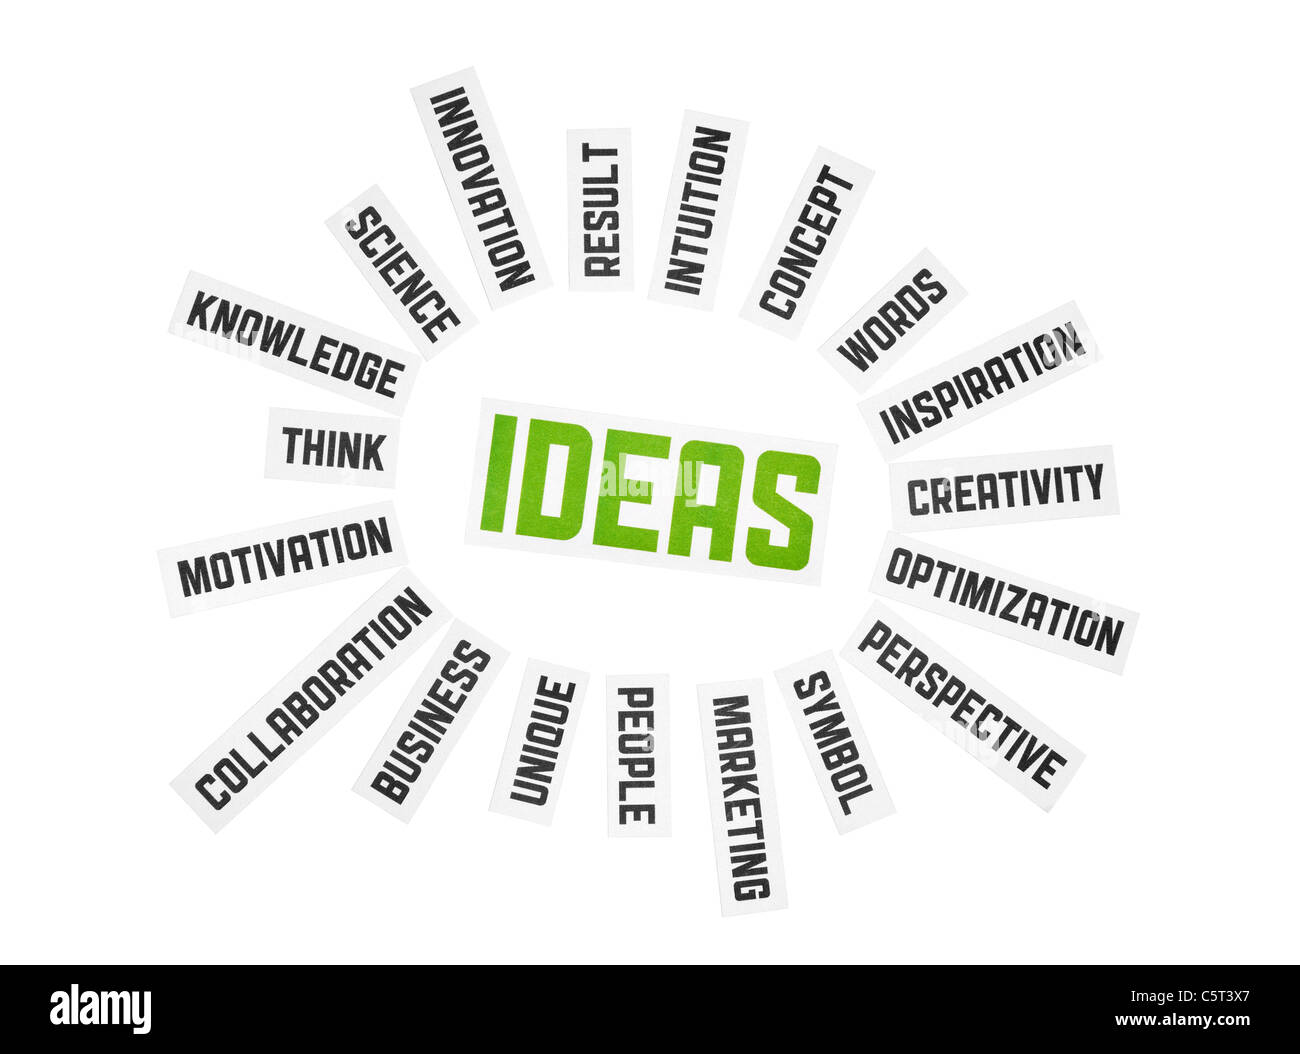 Ideas sign. Cut pieces of paper with text on ideas theme. Isolated on white. Stock Photo